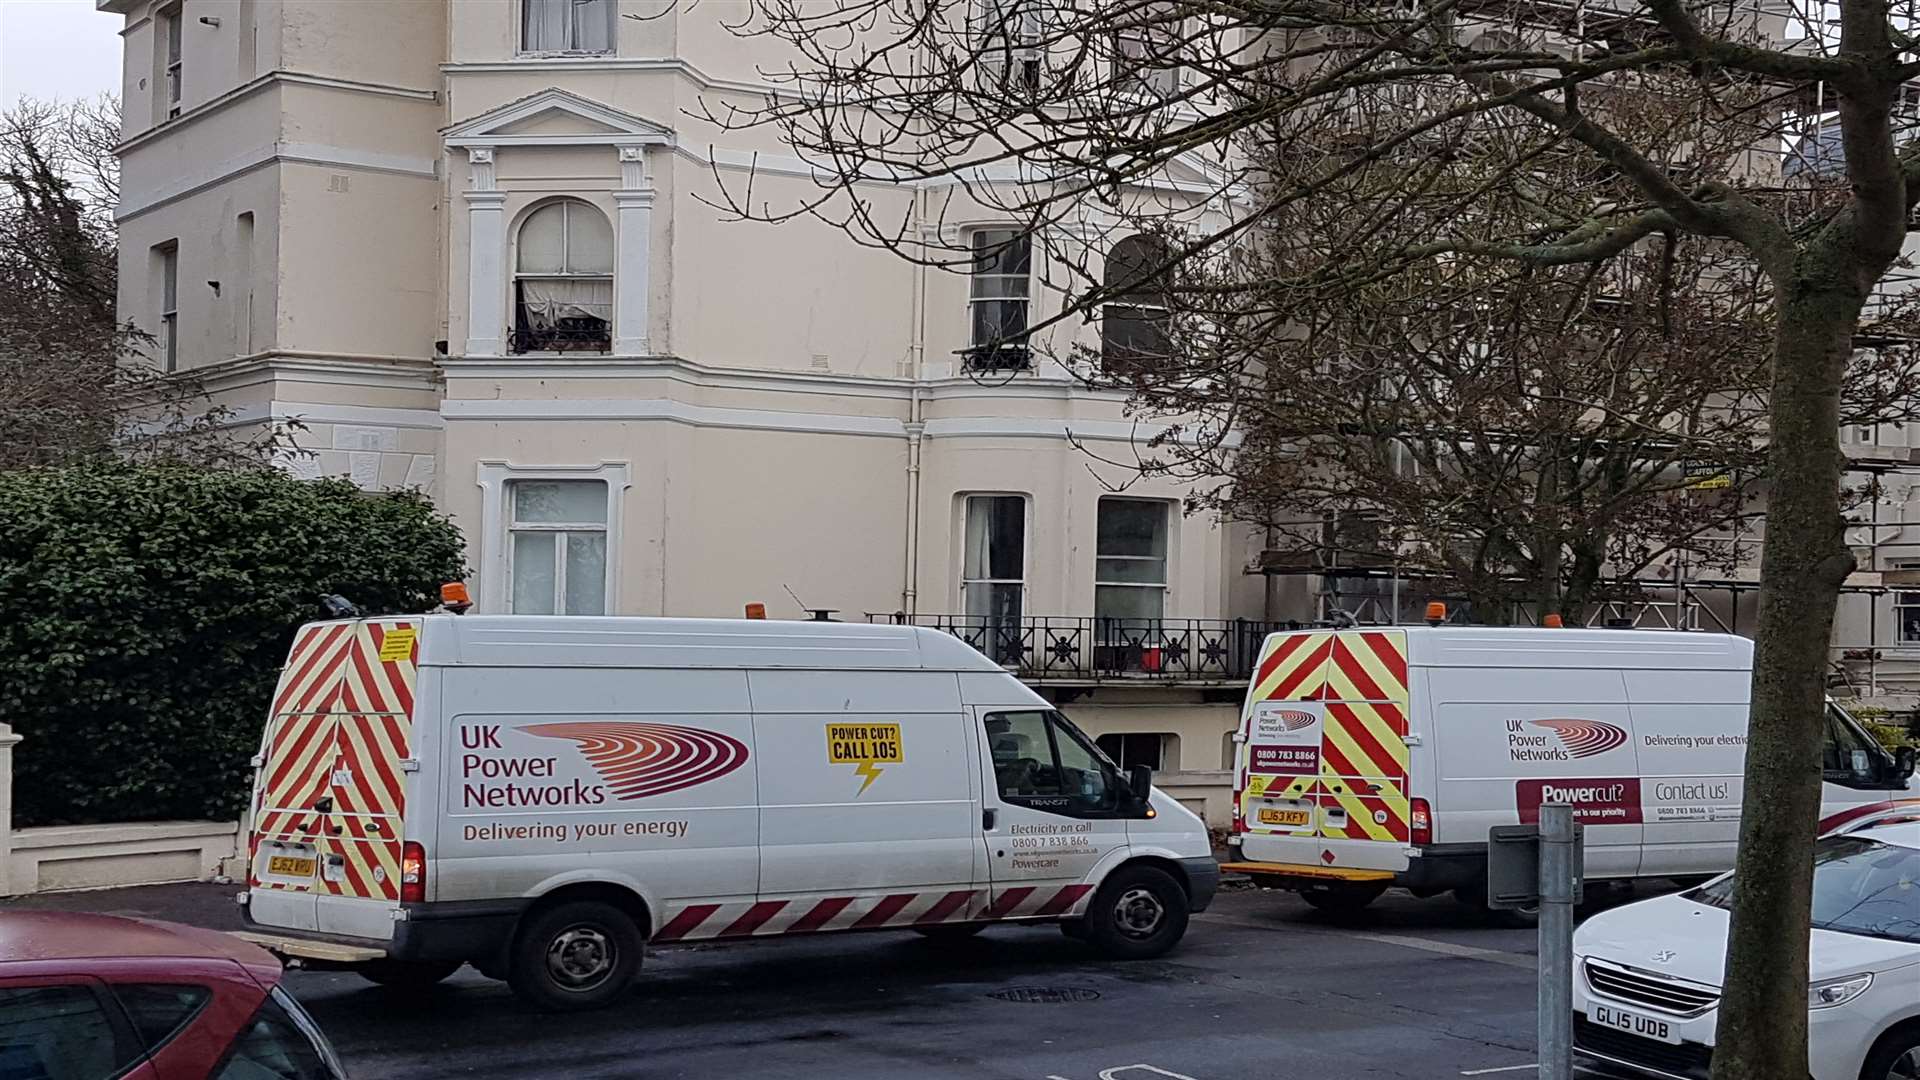 UK Power Networks are at the property.